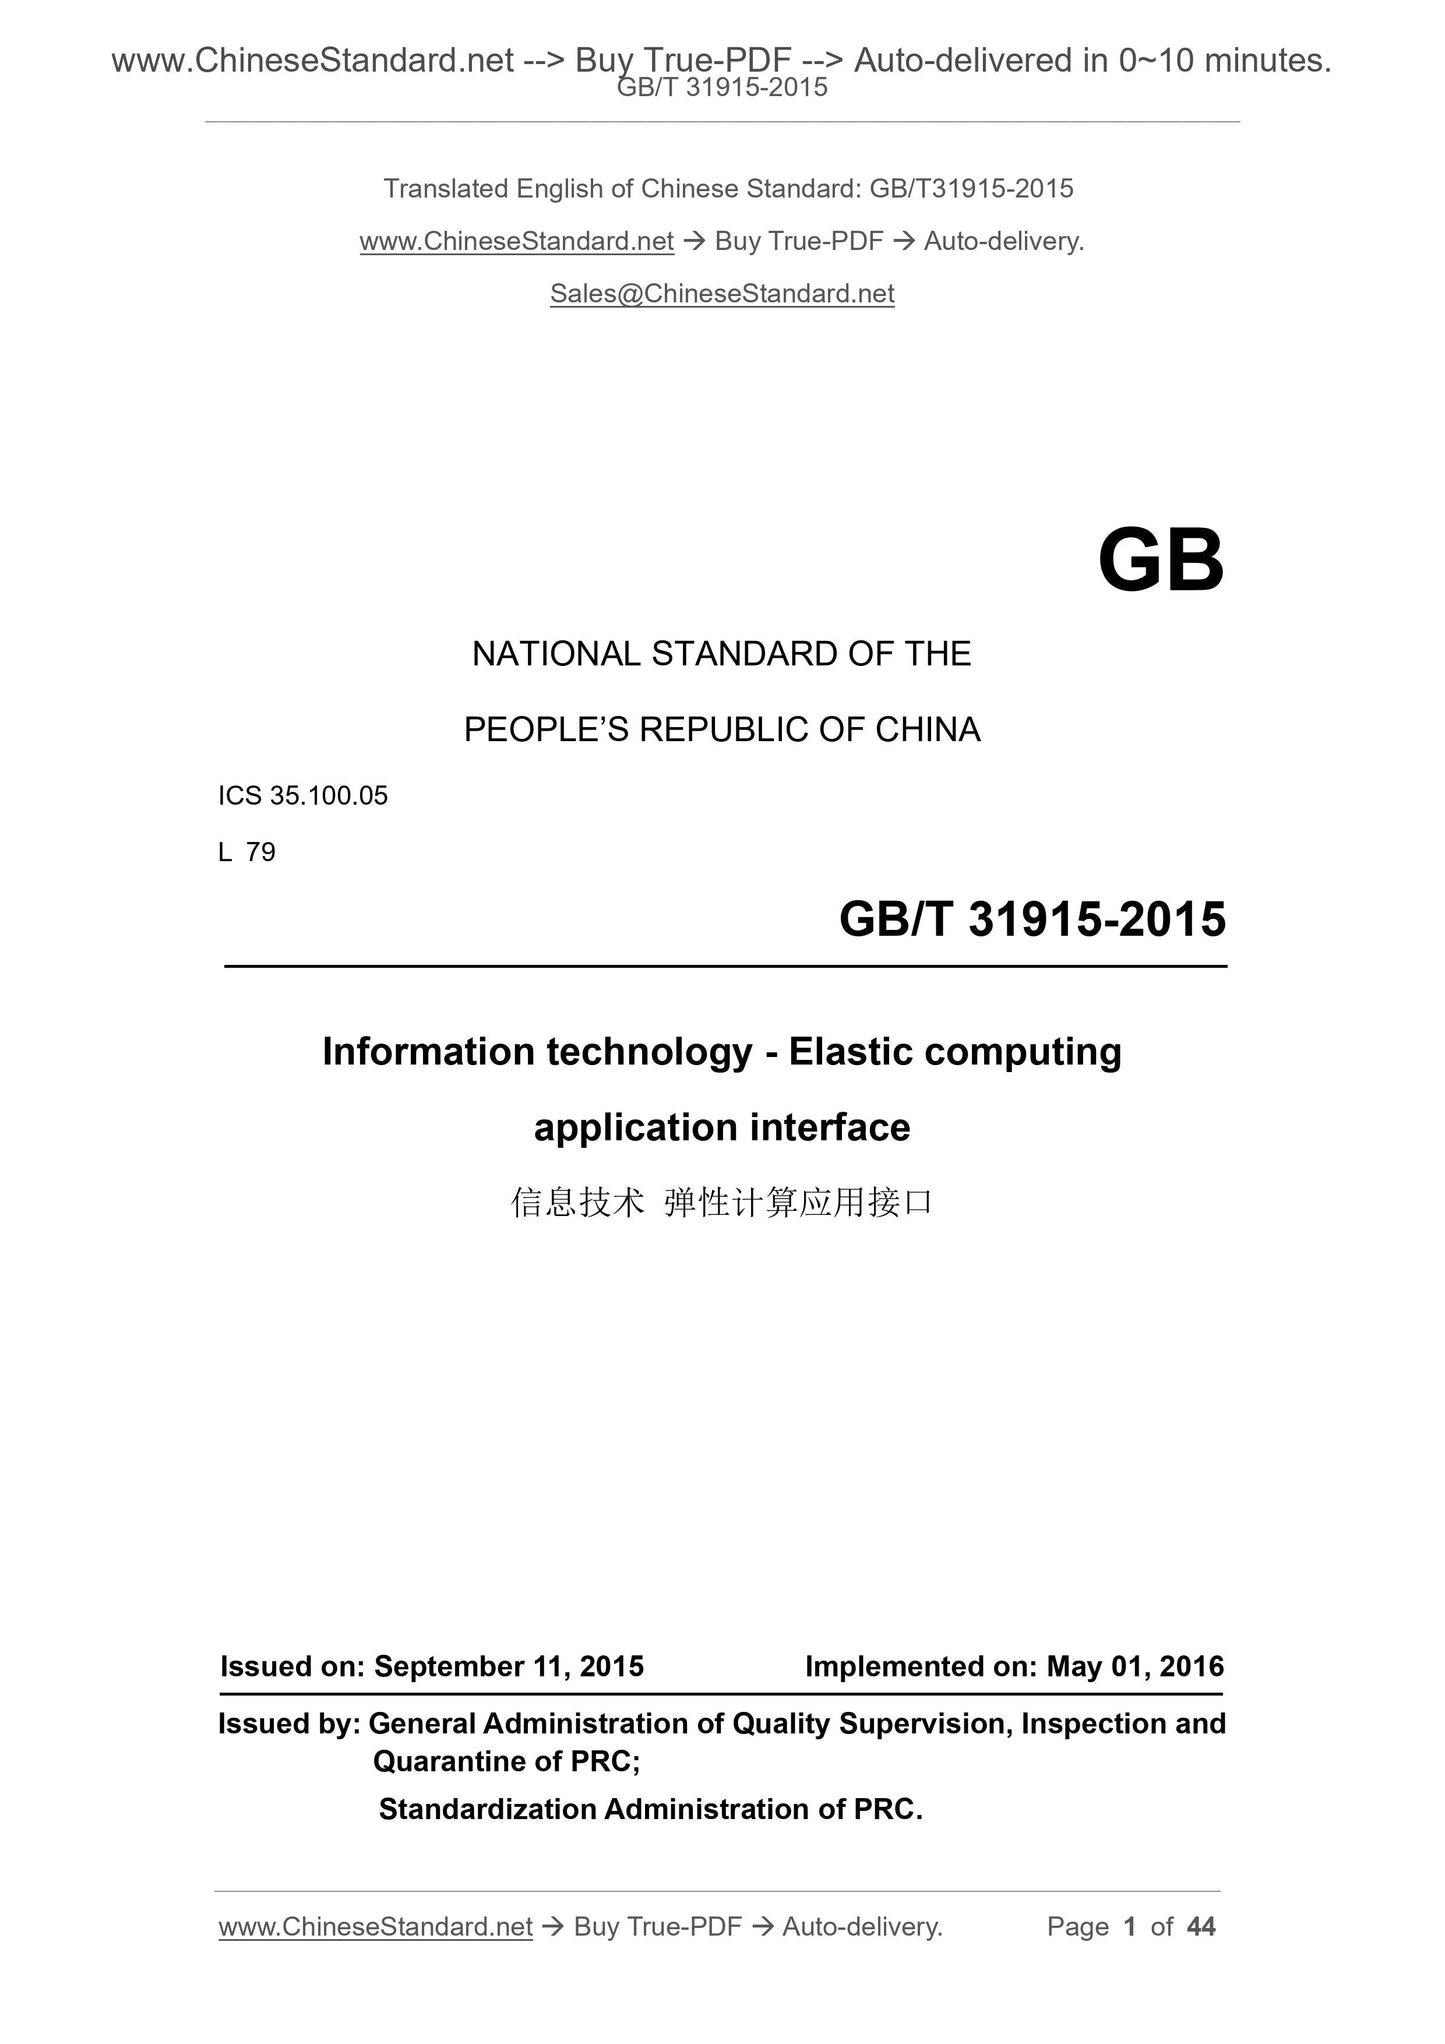 GB/T 31915-2015 Page 1